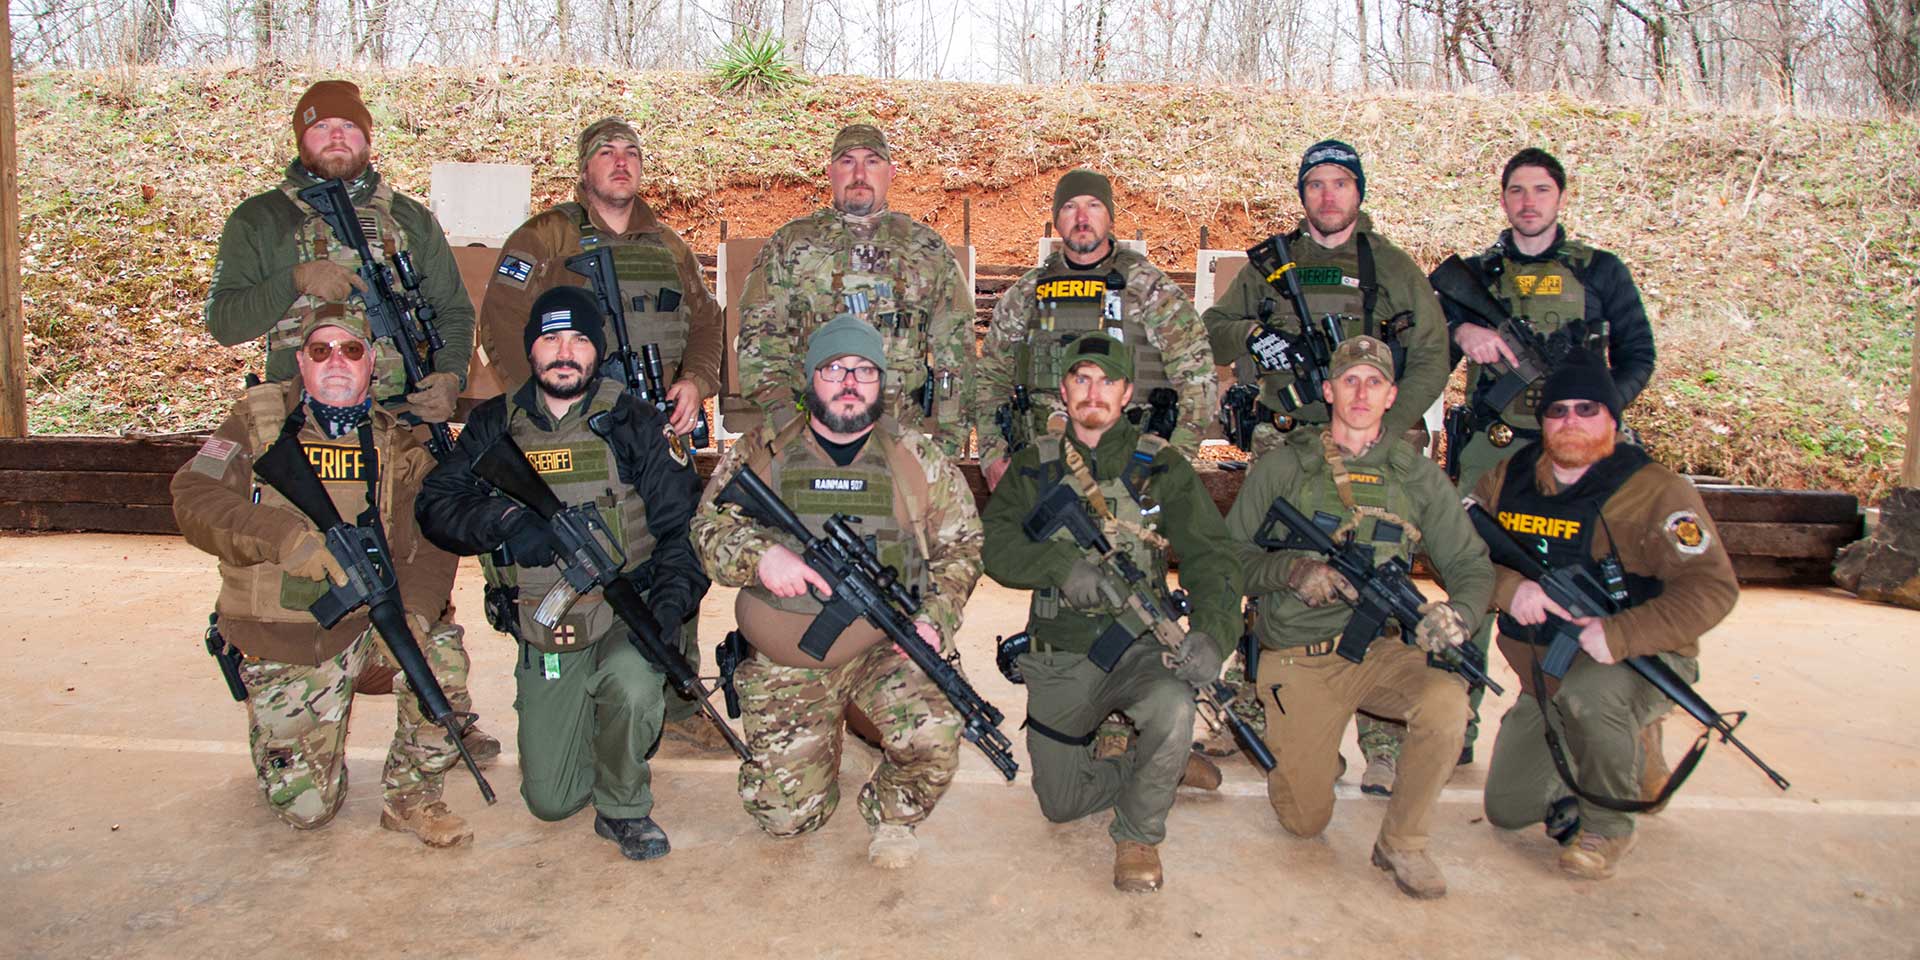 Special Weapons And Tactics Team (SWAT)